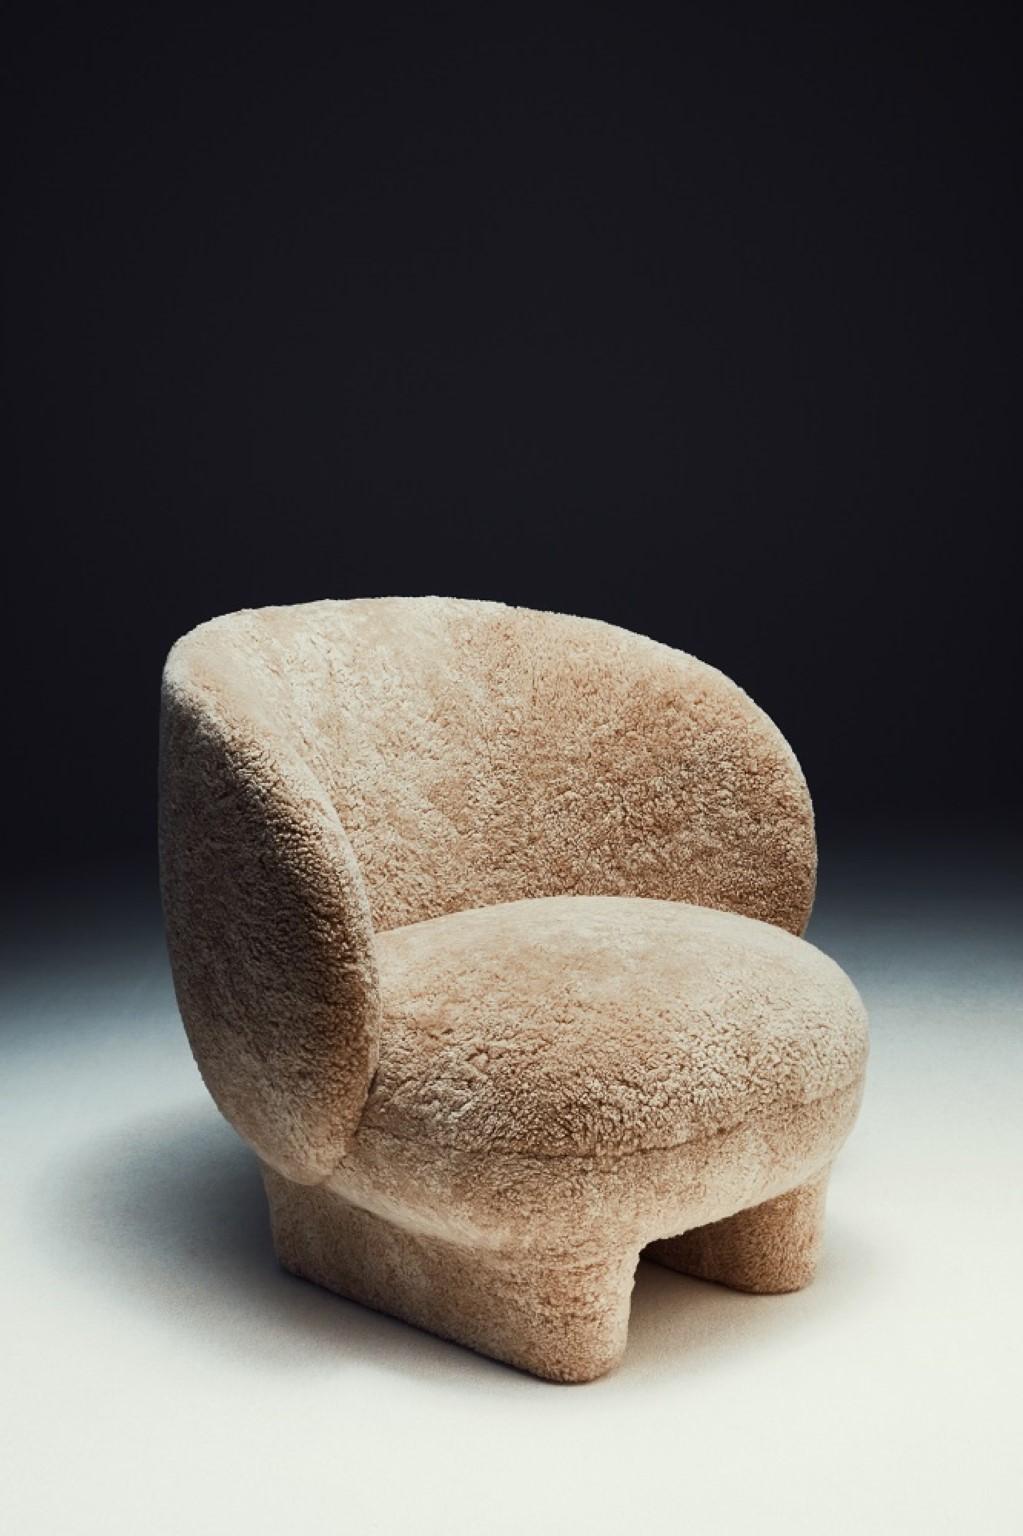 Moro Armchair by Sebastian Herkner
Dimensions: D 80 x W 79.7 x H 78.5 cm 
Materials: Sheepskin
Available in different fabrics.

‘Moro’ is a cosy cocoon of a chair. Named after a famous Venetian Doge, the design evokes the strong personality of an